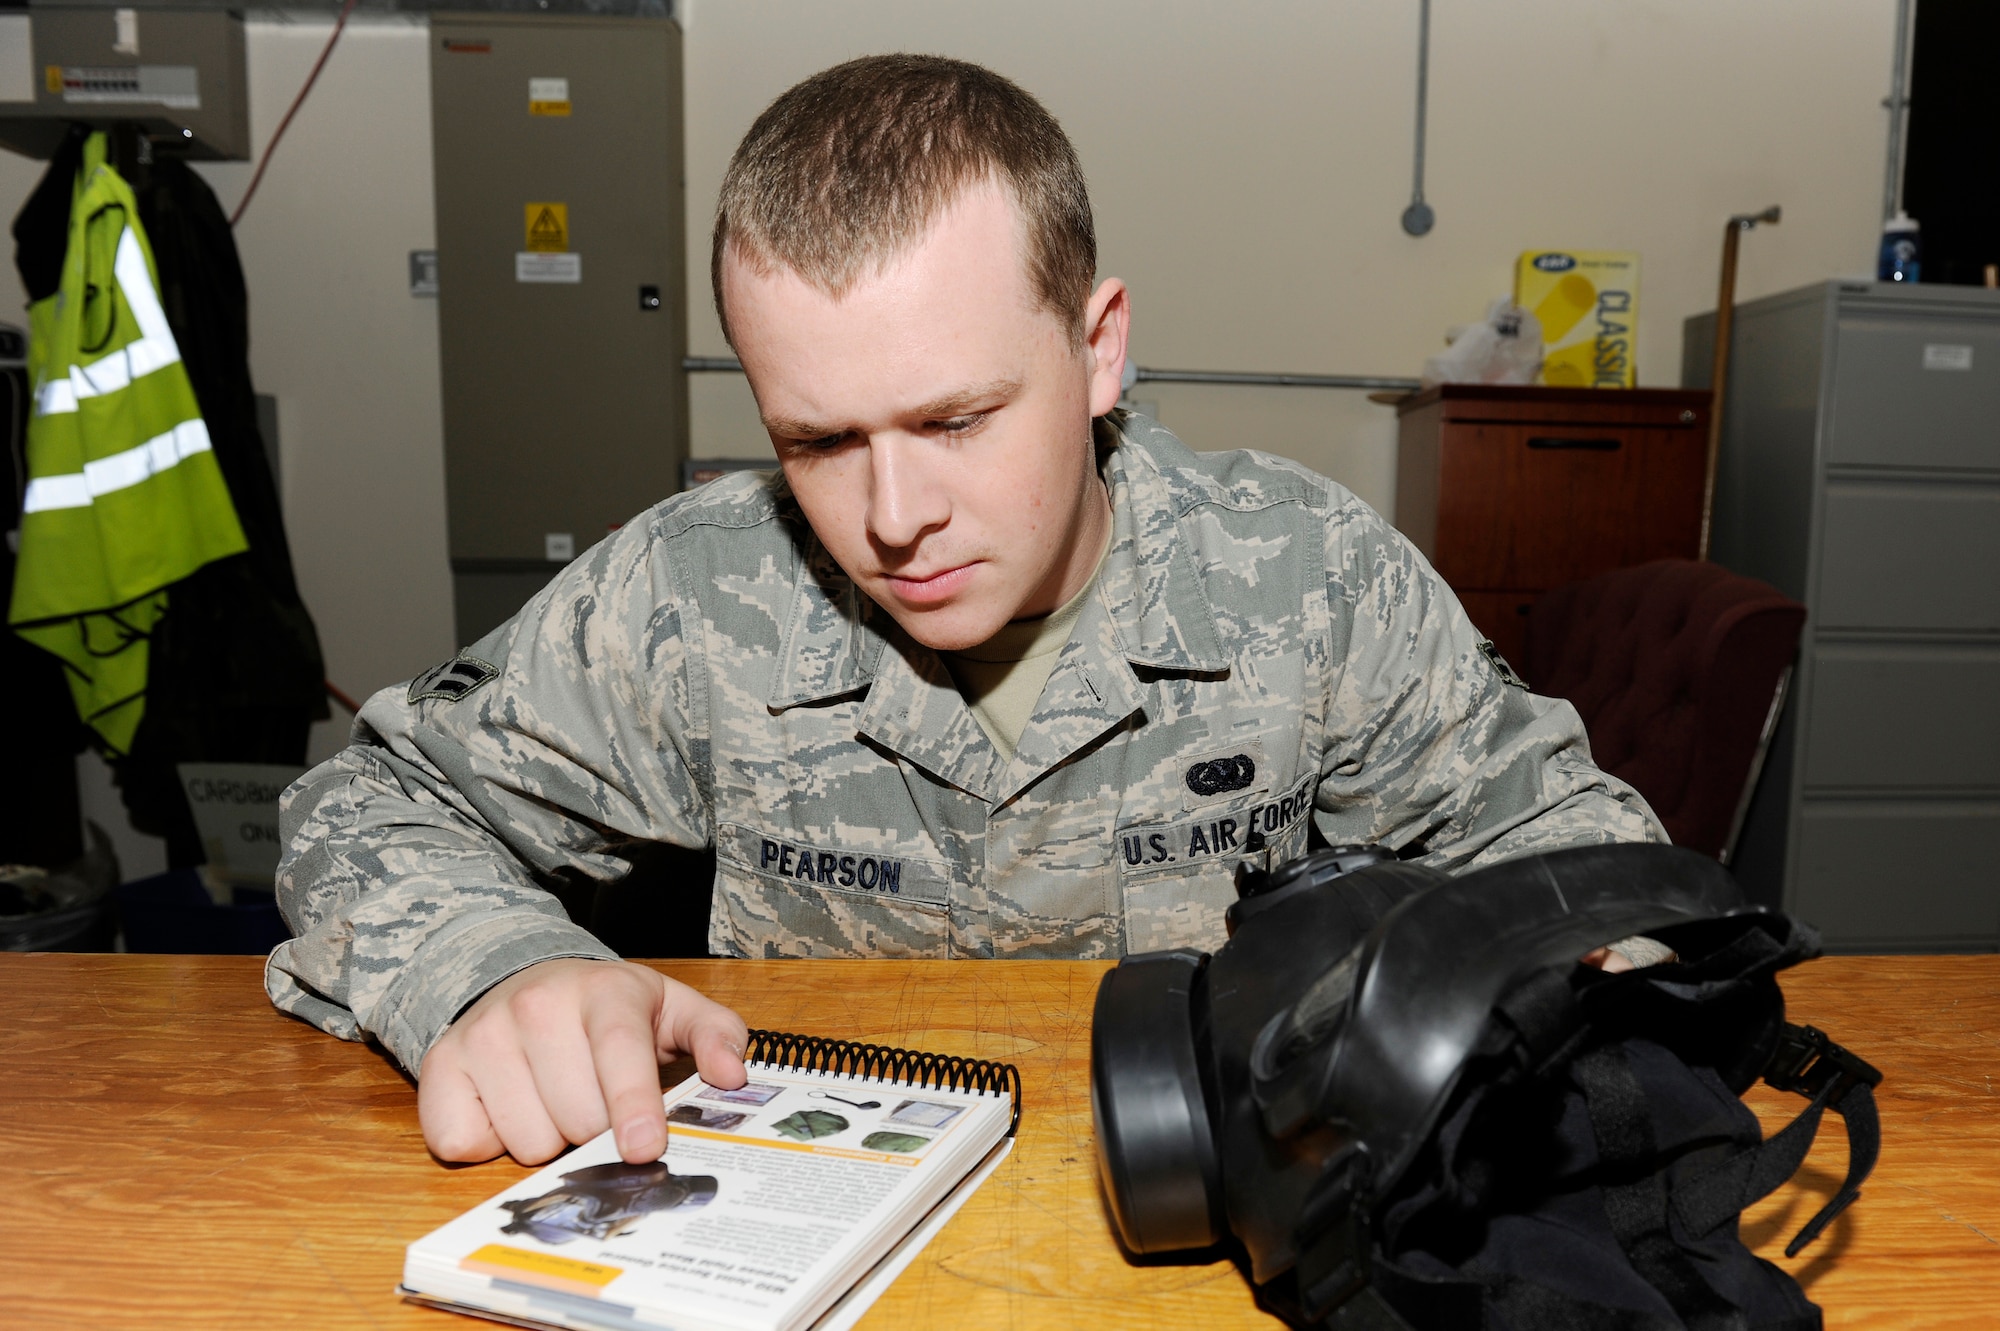 ROYAL AIR FORCE LAKENHEATH, England – Airman 1st Class Guy Pearson, 48th Logistics Readiness Squadron individual protective equipment journeyman, references an Airman’s Manual for guidance regarding the M50 Joint Service General Purpose Field Mask Sept. 22. The M50 was first issued in May 2009 and has been fielded by Pacific Air Force and United States Air Forces in Europe. (U.S. Air Force photo/Airman 1st Class Lausanne Morgan)